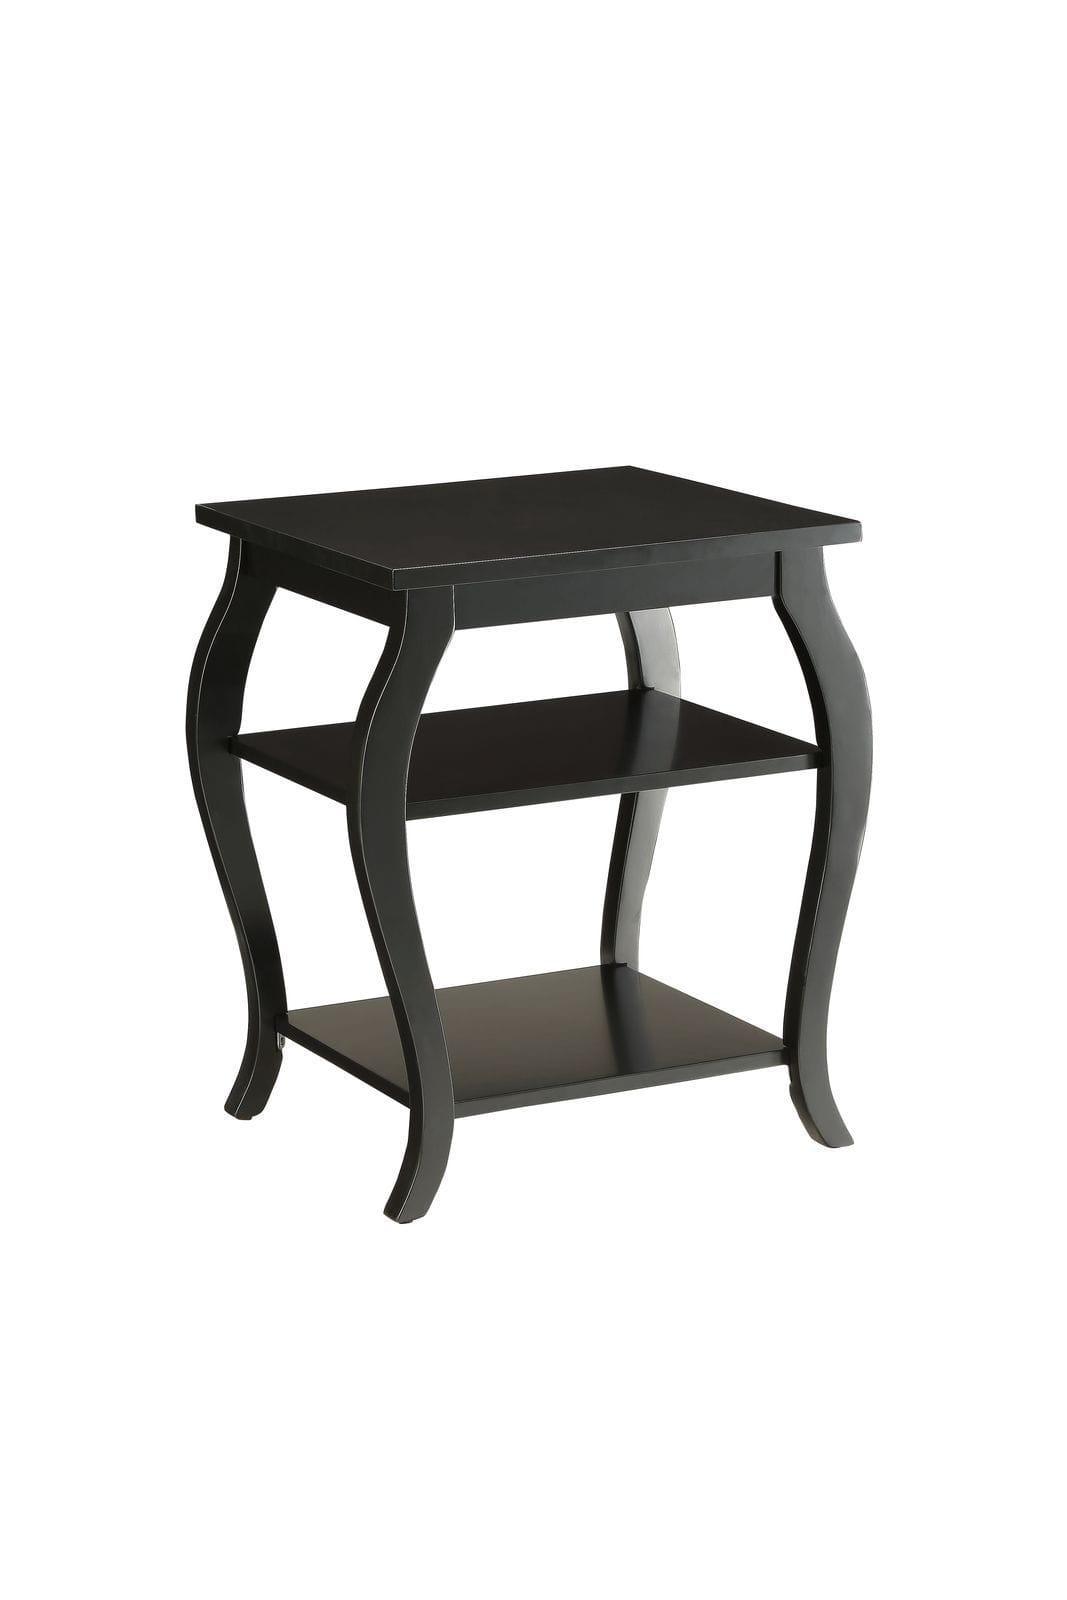 Shop ACME Becci End Table in Black 82826 Mademoiselle Home Decor